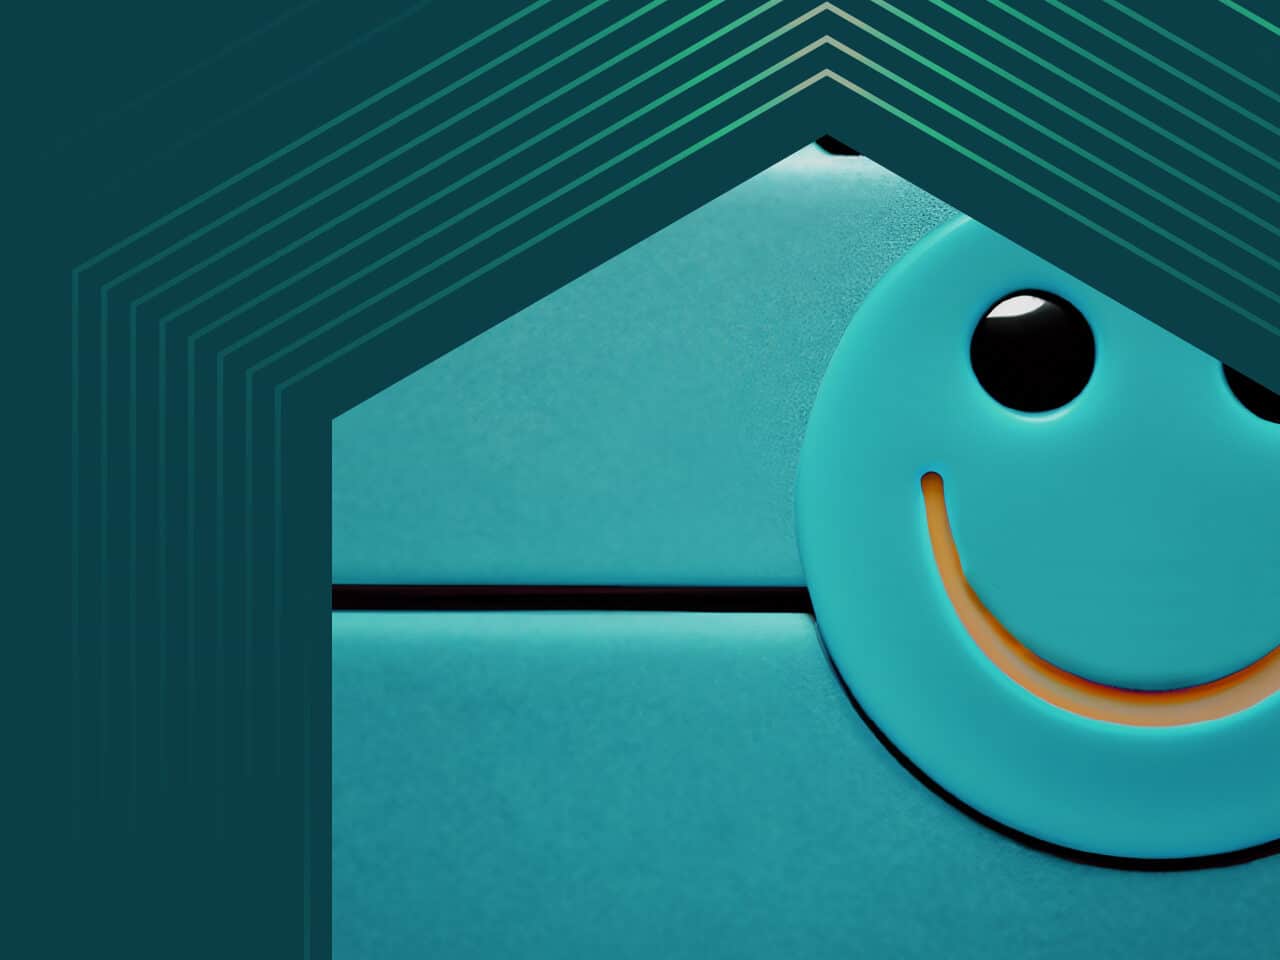 “You can’t hire a smile”: Bringing emotional intelligence to your IT service desk